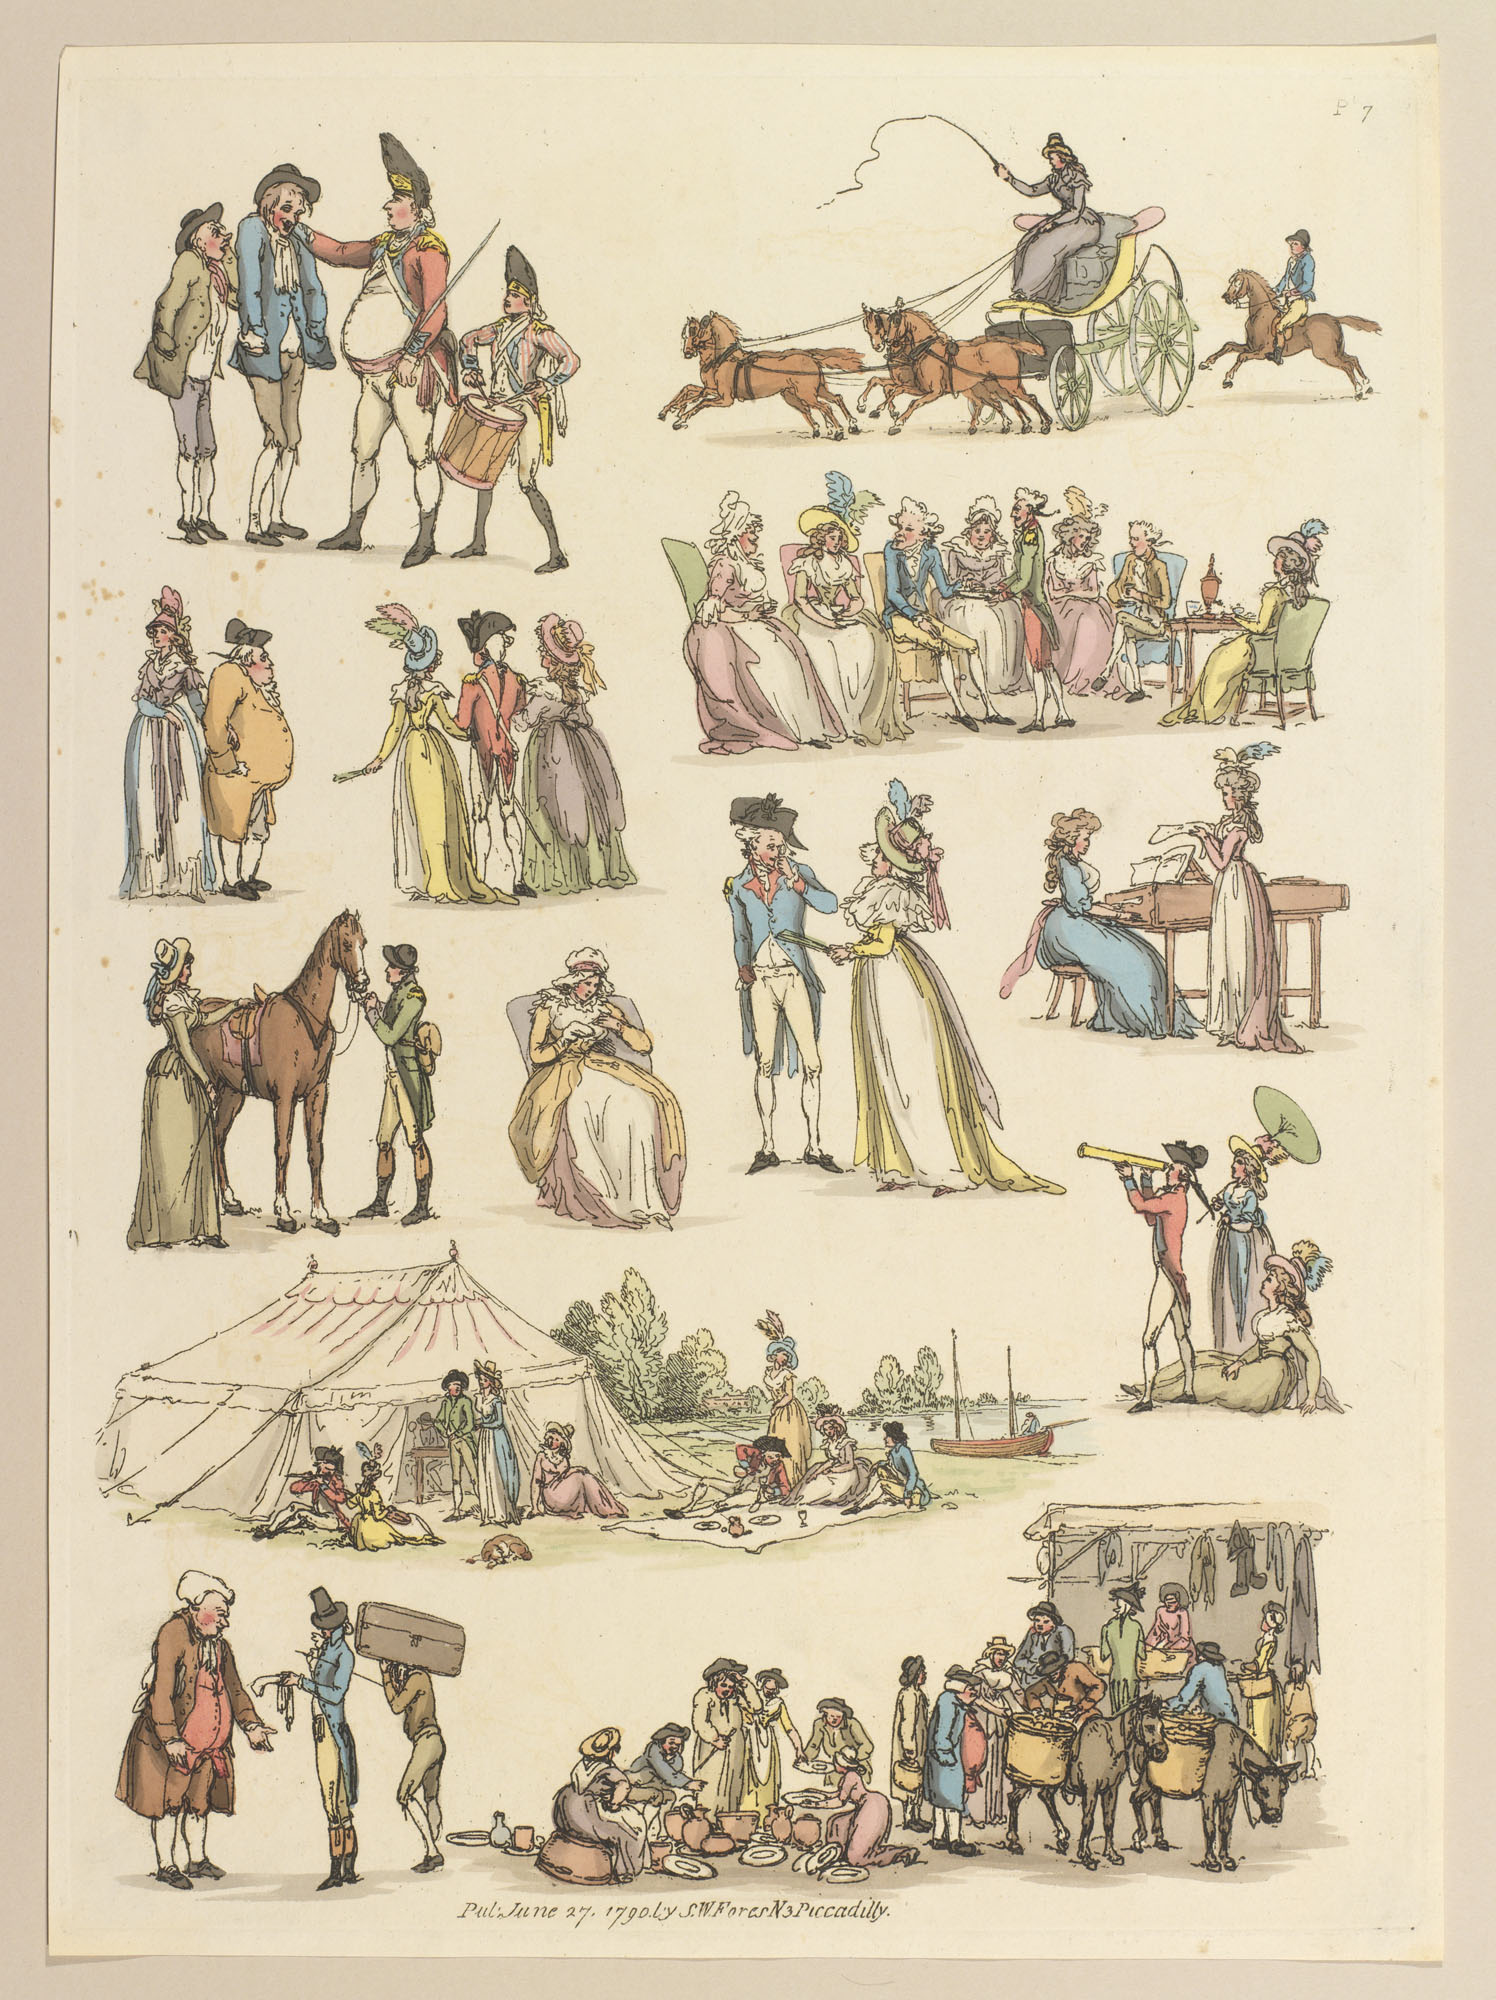 Thomas Rowlandson’s Picturesque Studies and Scenes of Everyday Life and People (1790c.)